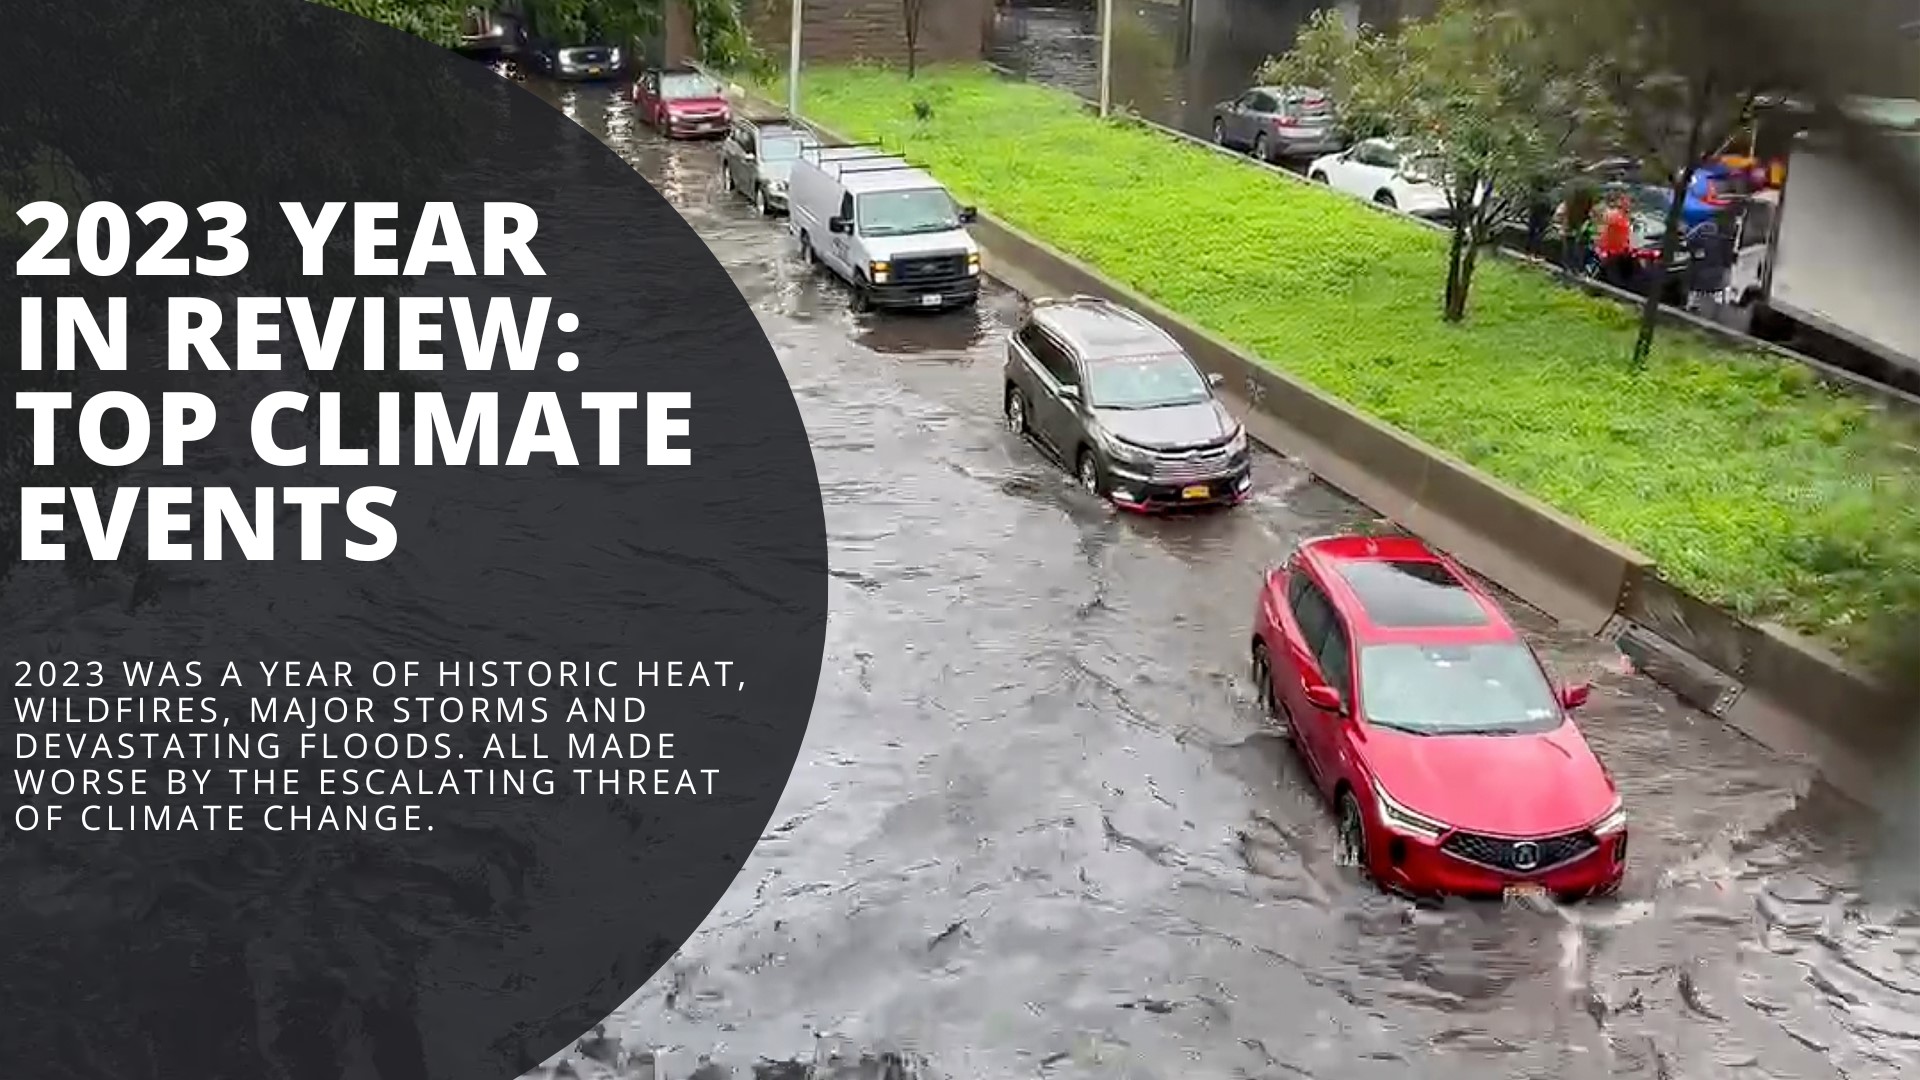 A special In the News Now takes a look back at some of the top climate events in 2023.